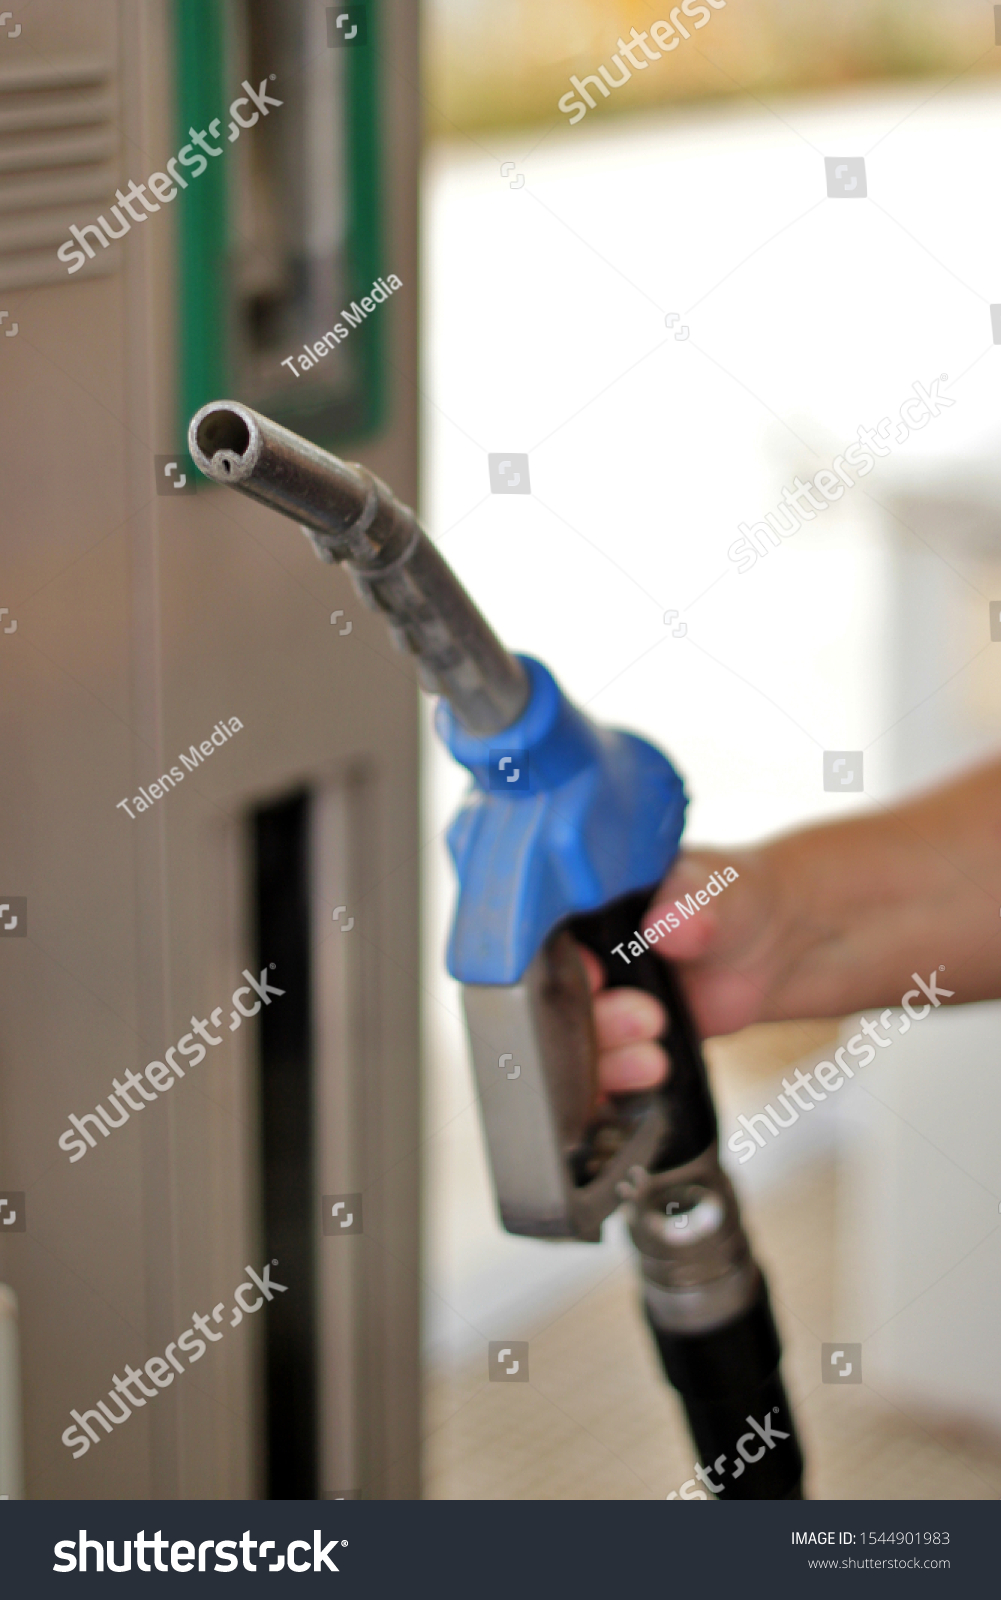 Close-up of hand held fuel pump gun. End of fossil fuels and new energies #1544901983